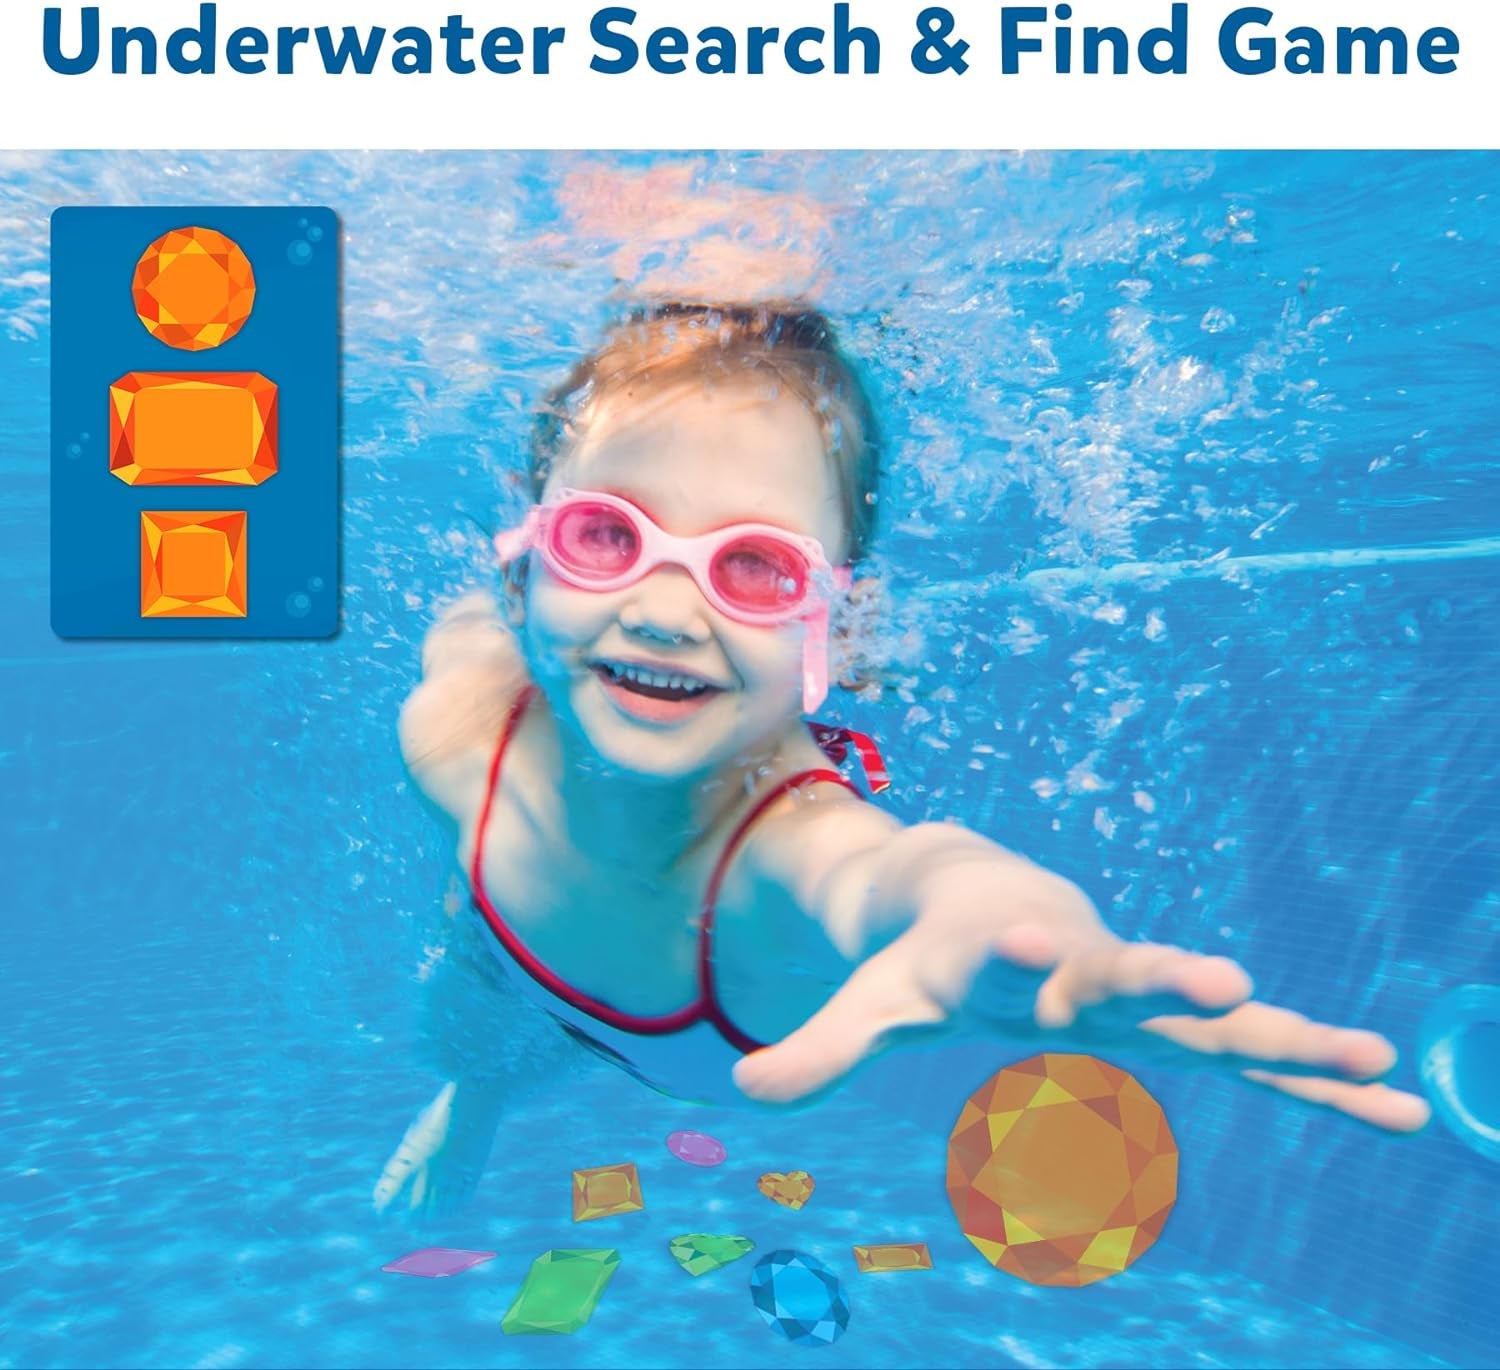 Seek & Splash Diving Gem Toys - Underwater Search and Find Game, Perfect for Swimming Pool & Summer Fun for Kids, Gifts for Boys & Girls Ages 6, 7, 8, 9 & Up